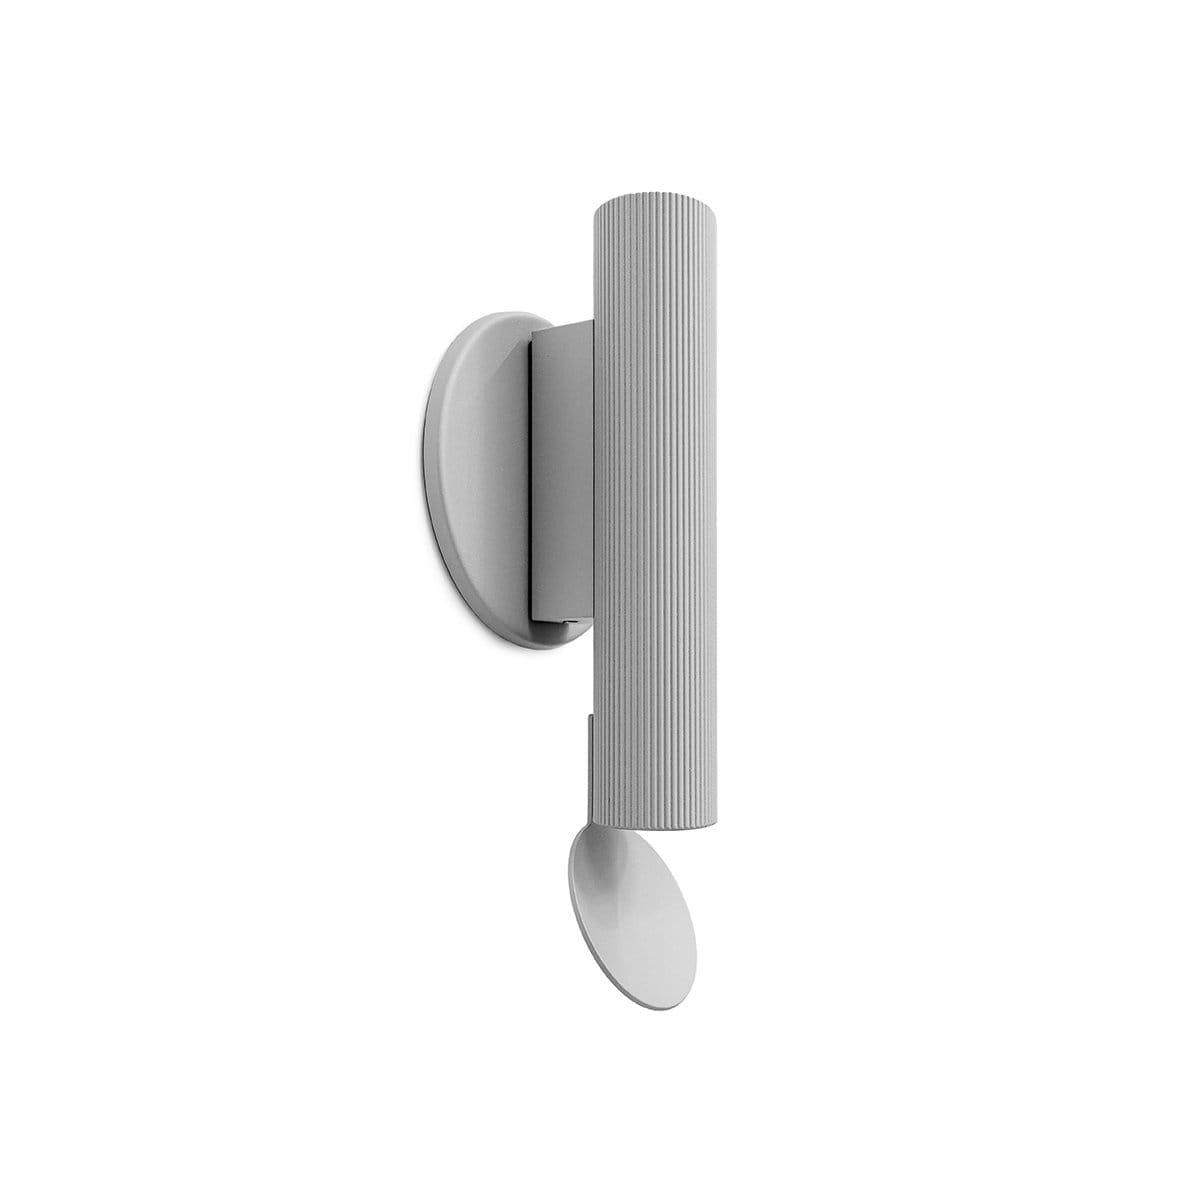 Flauta Indoor/Outdoor Wall Sconce - Curated Lighting $1000-$2000, Black, brown, ceiling/wall, flos, gray, Green, White